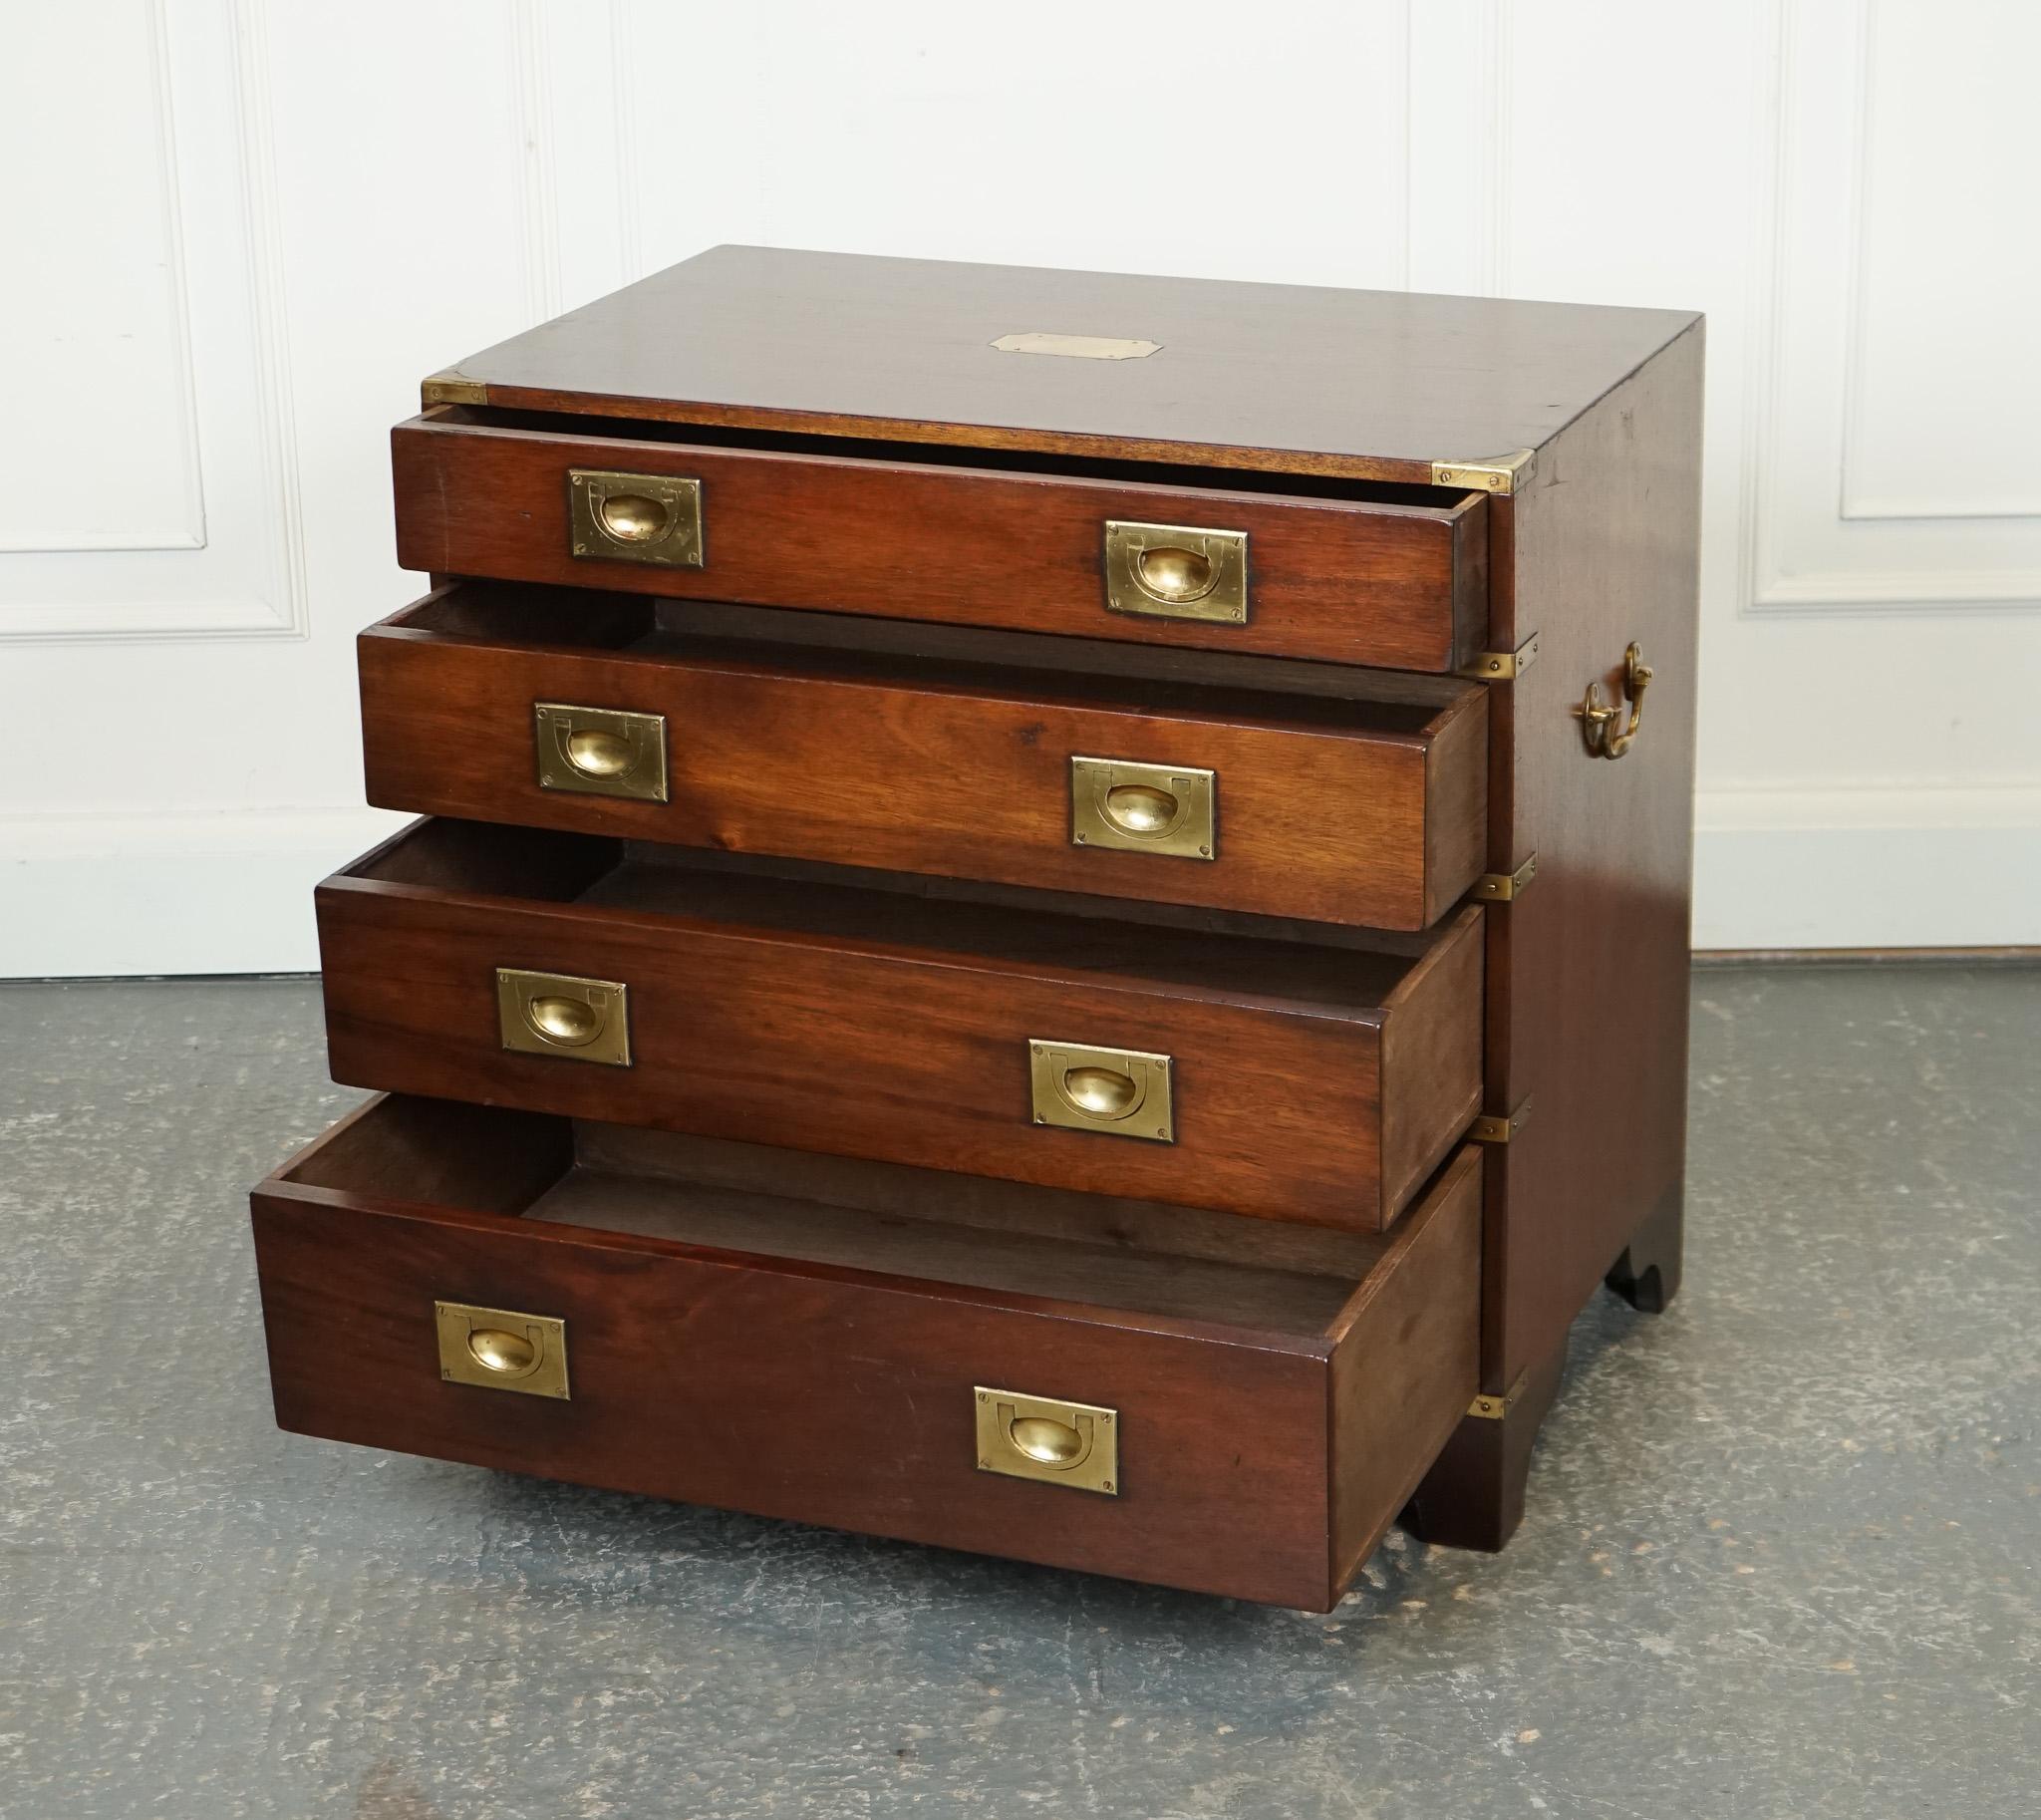 Campaign STUNNING HARRODS KENNEDY MILITARY CAMPAIGN CHEST OF DRAWERS WiTH BRASS HANDLES